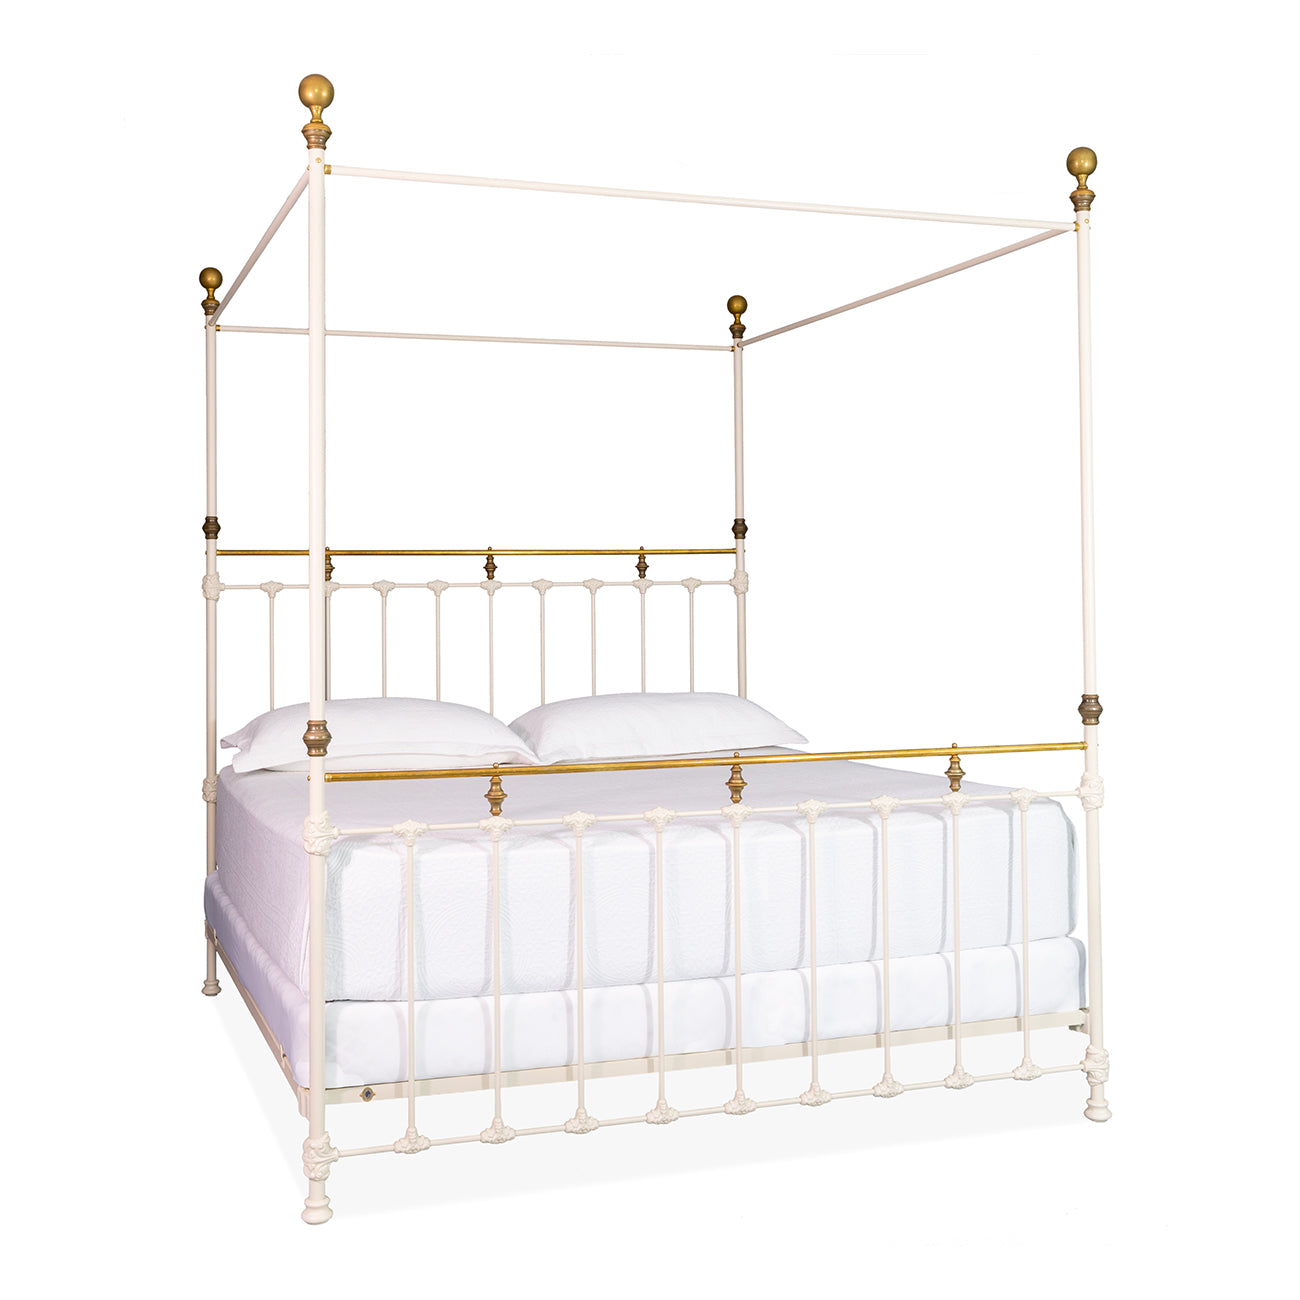 Excelsior Iron and Brass Bed – Brass Beds of Virginia